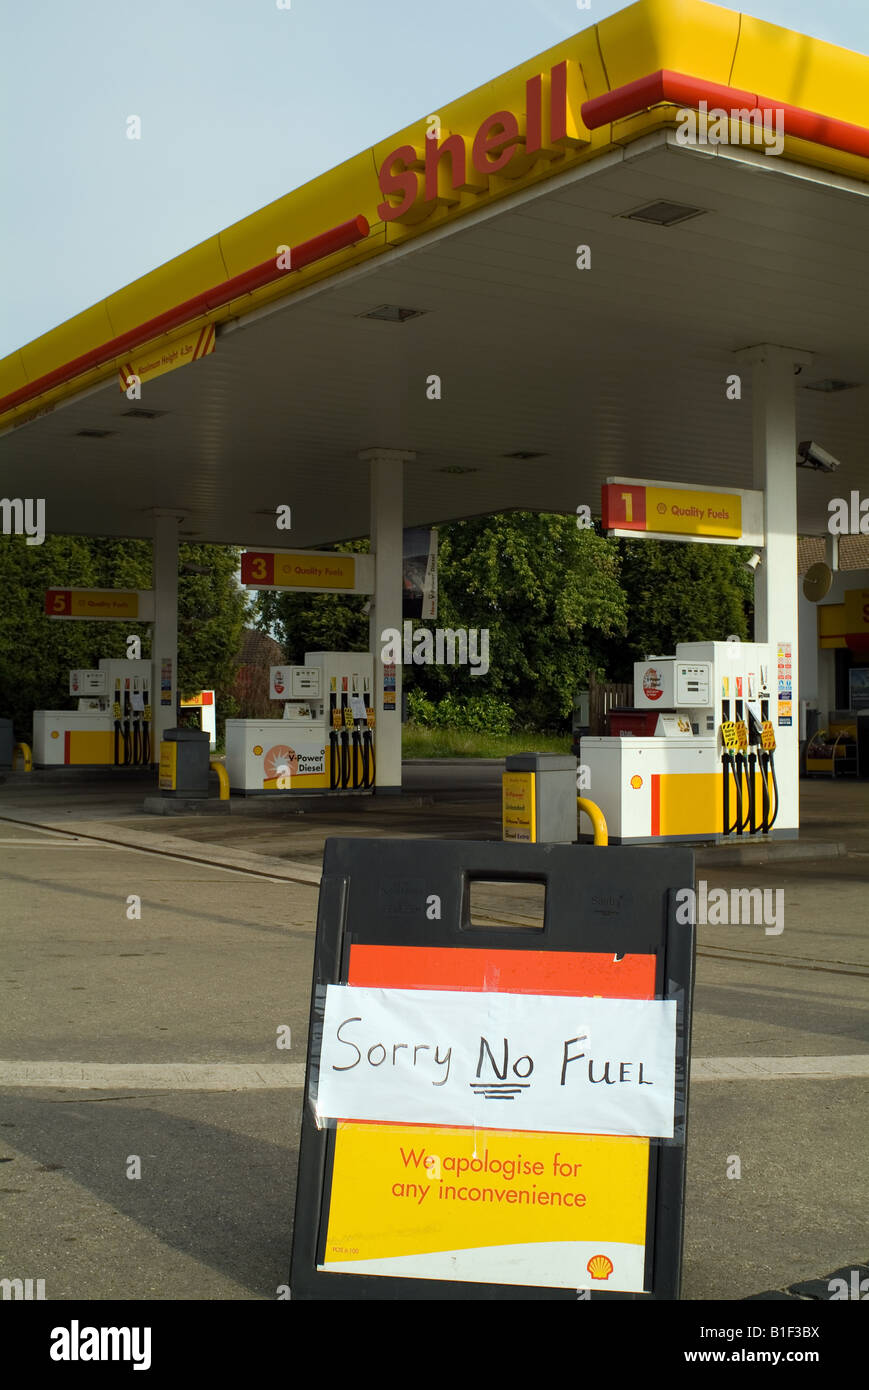 empty shell petrol filling station with no fuel Stock Photo